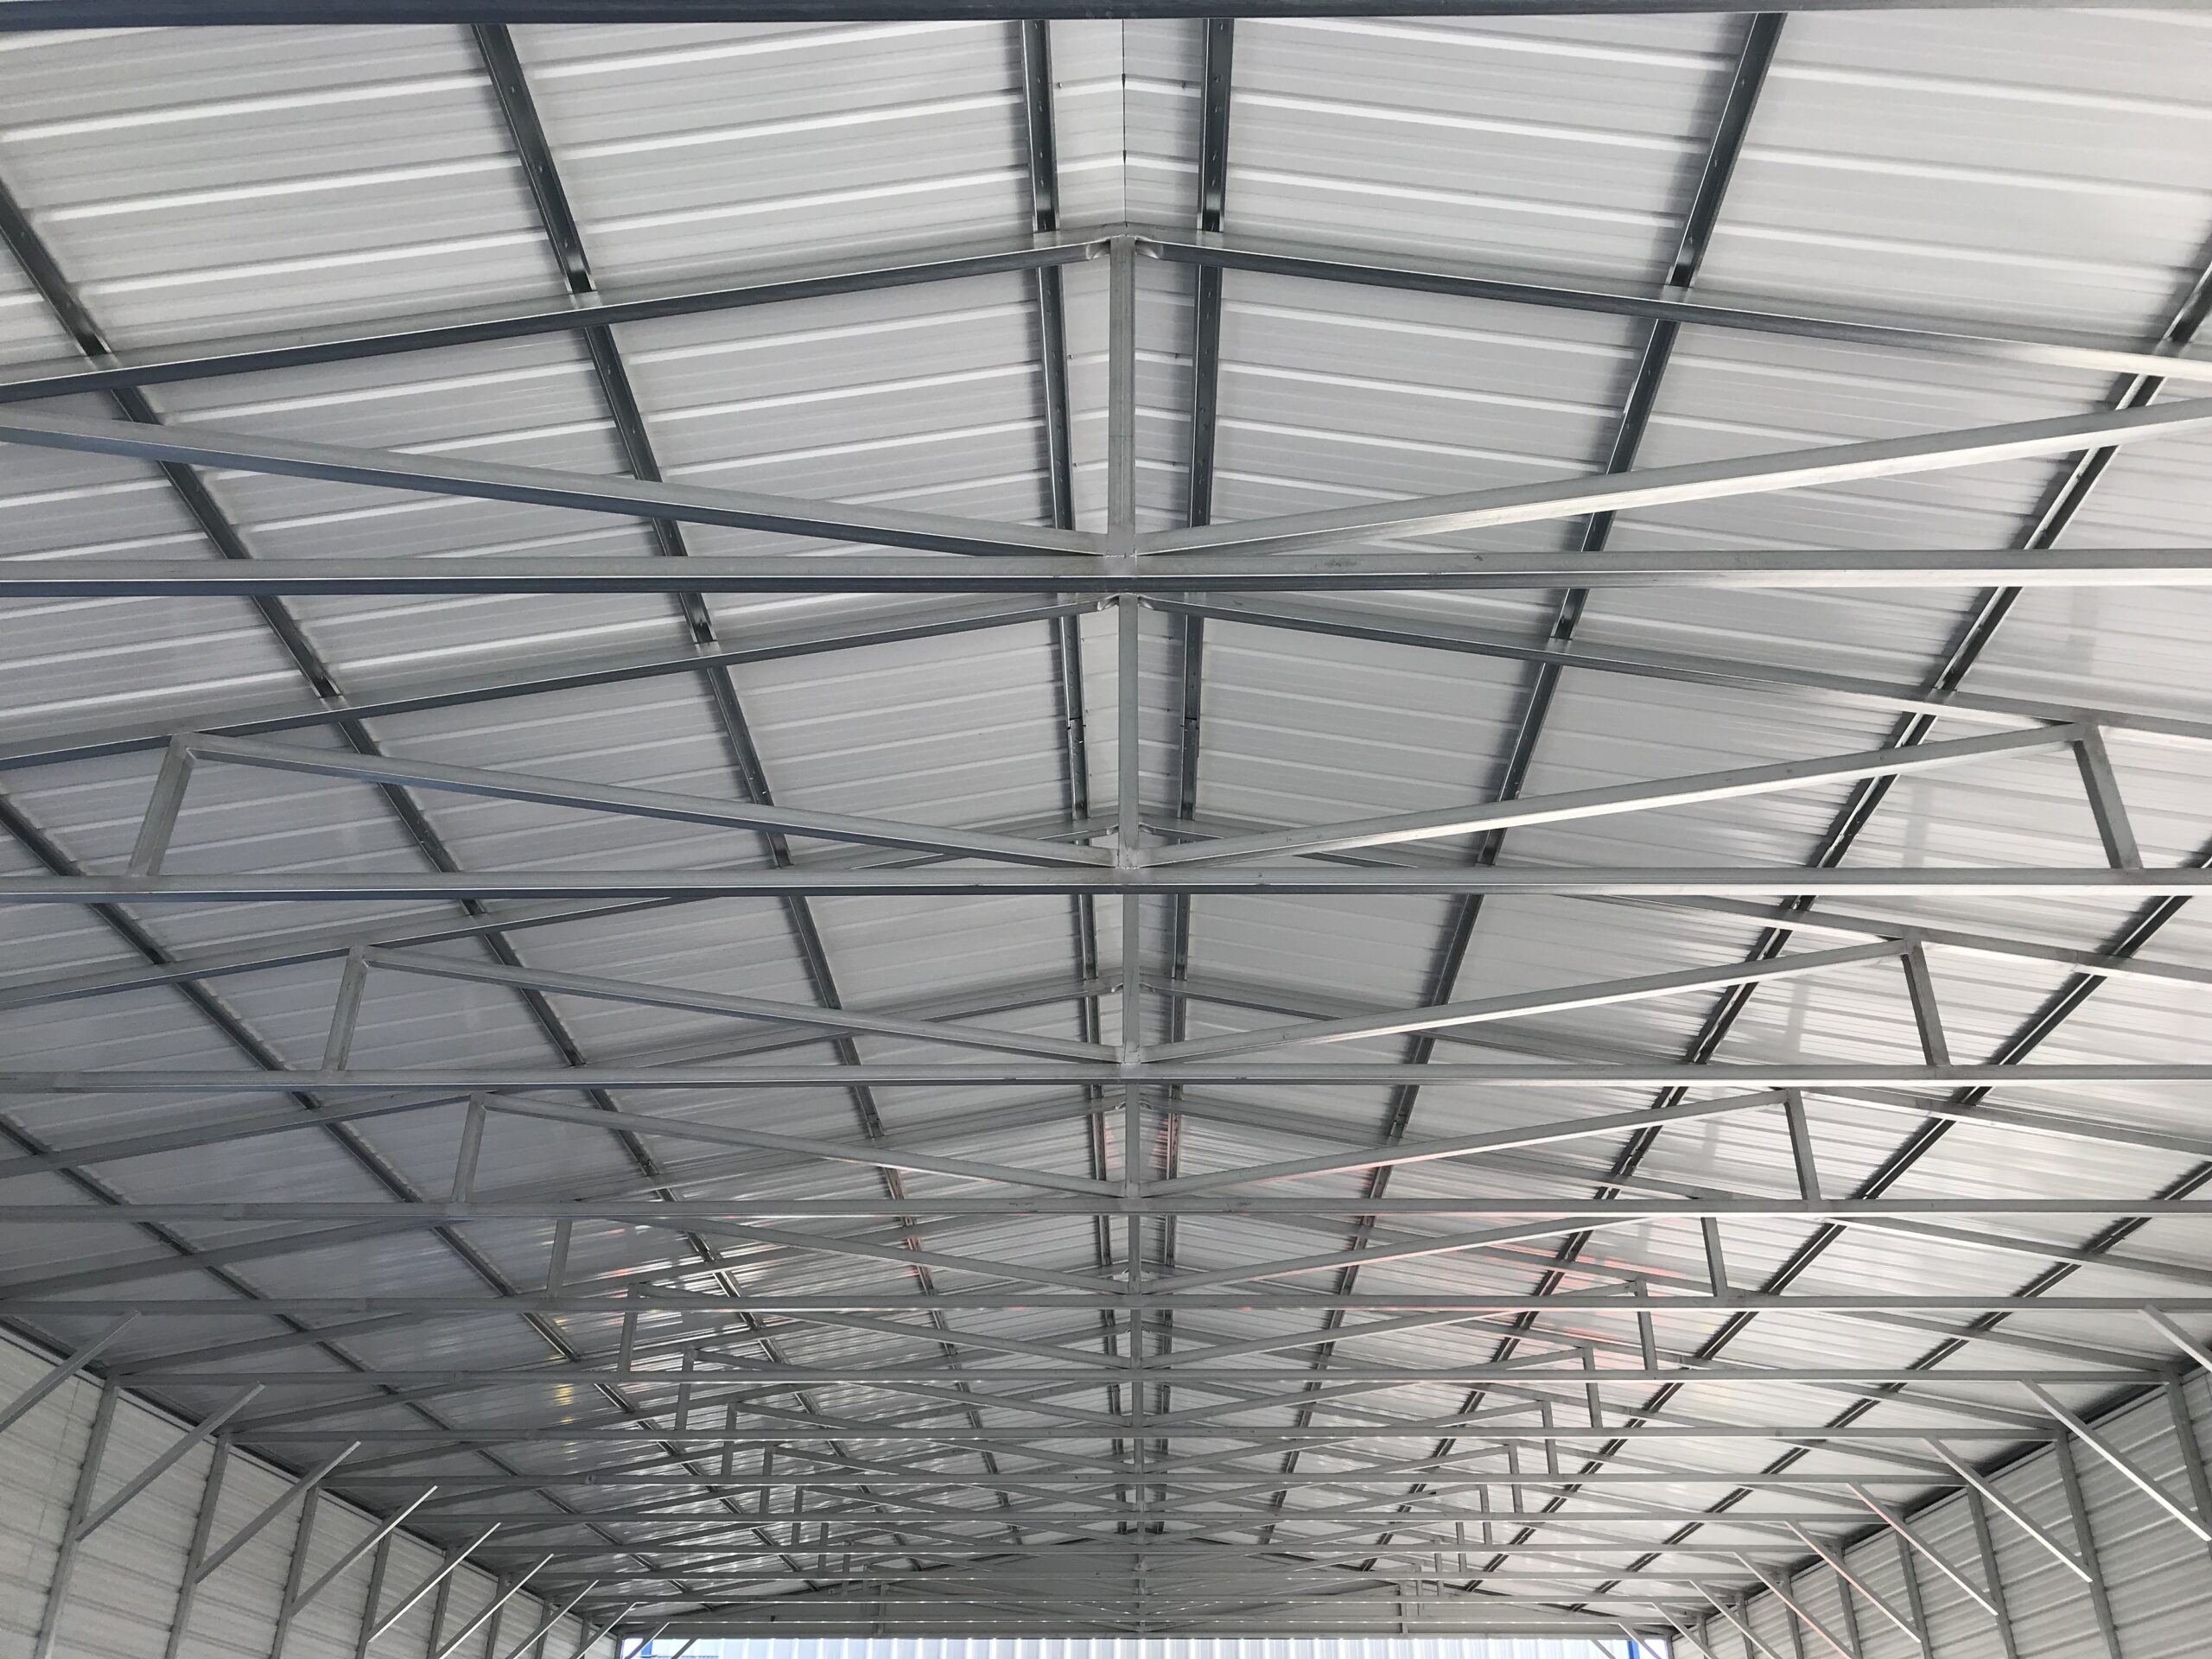 A metal ceiling with multiple rows of white panels.